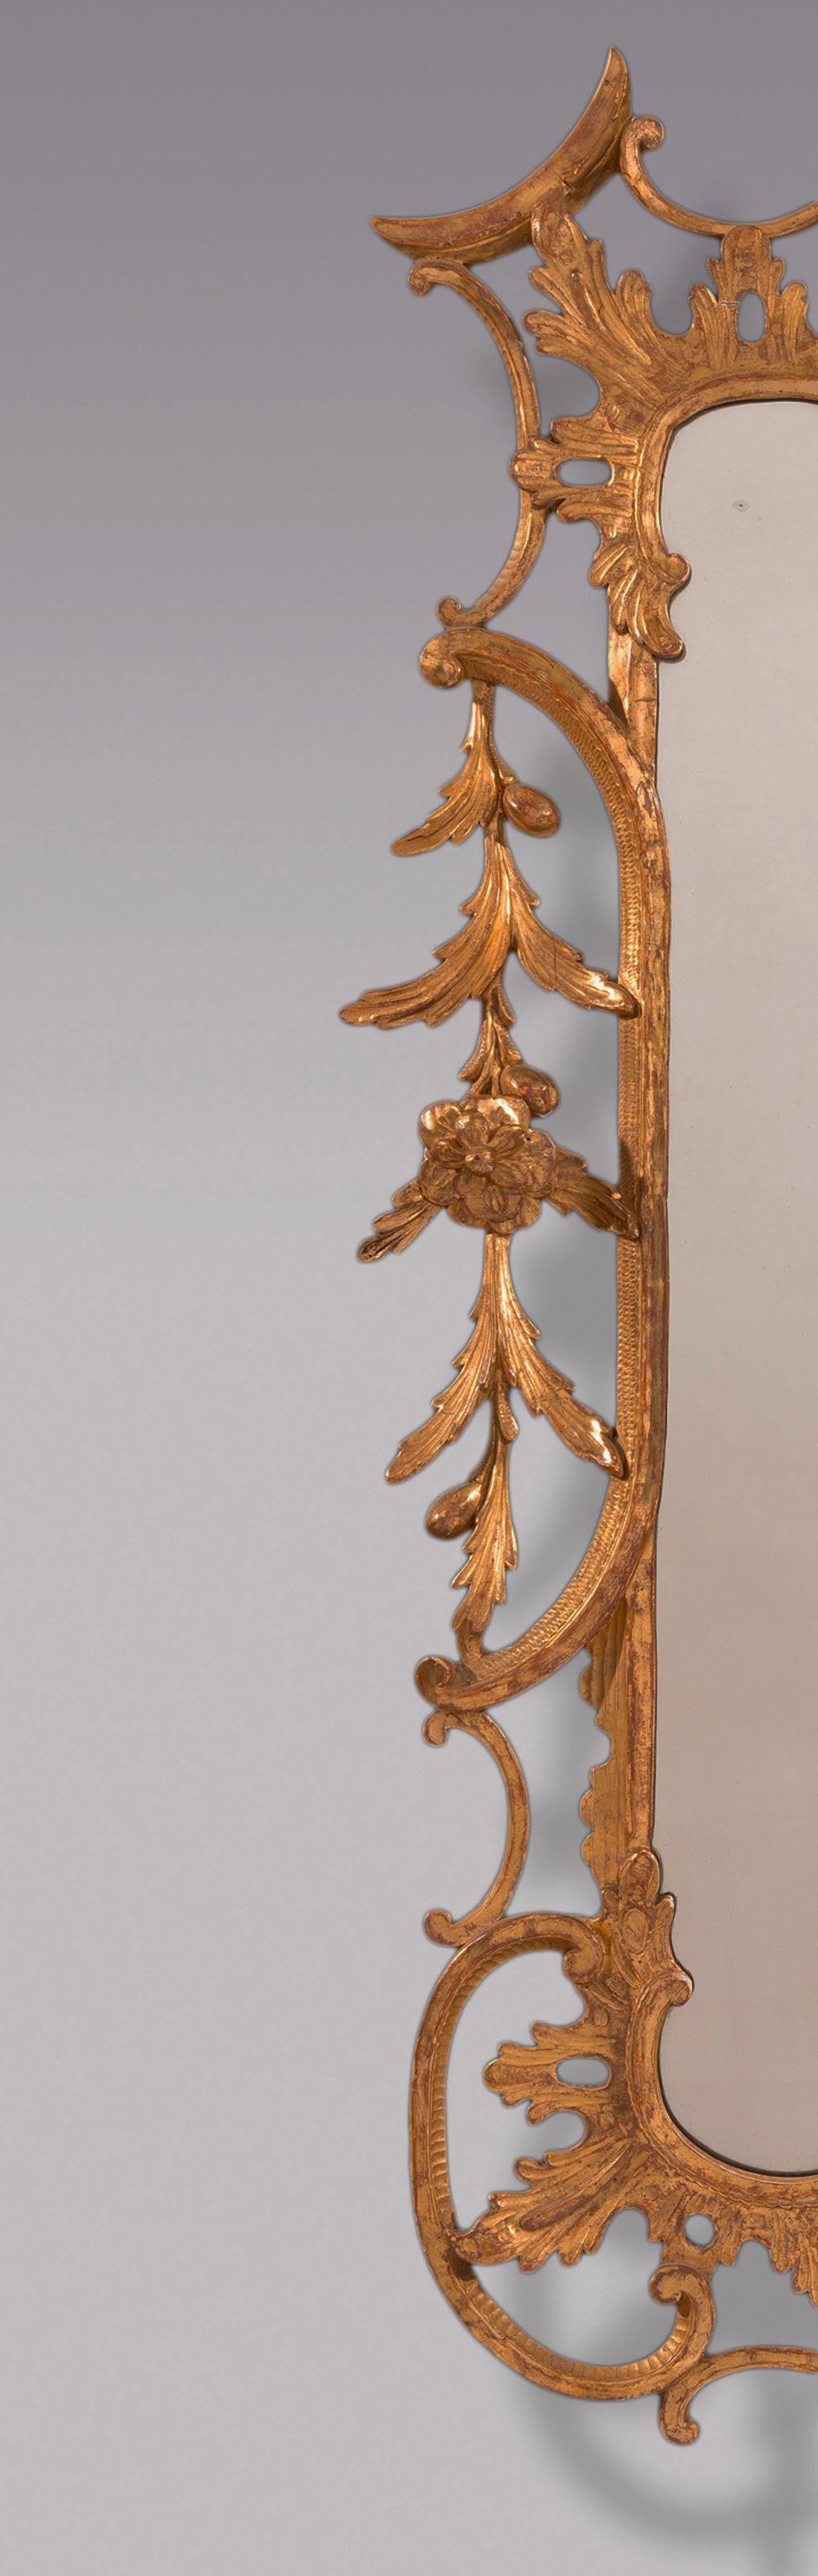 English Antique Chippendale period carved wood and gilt rococo mirror For Sale